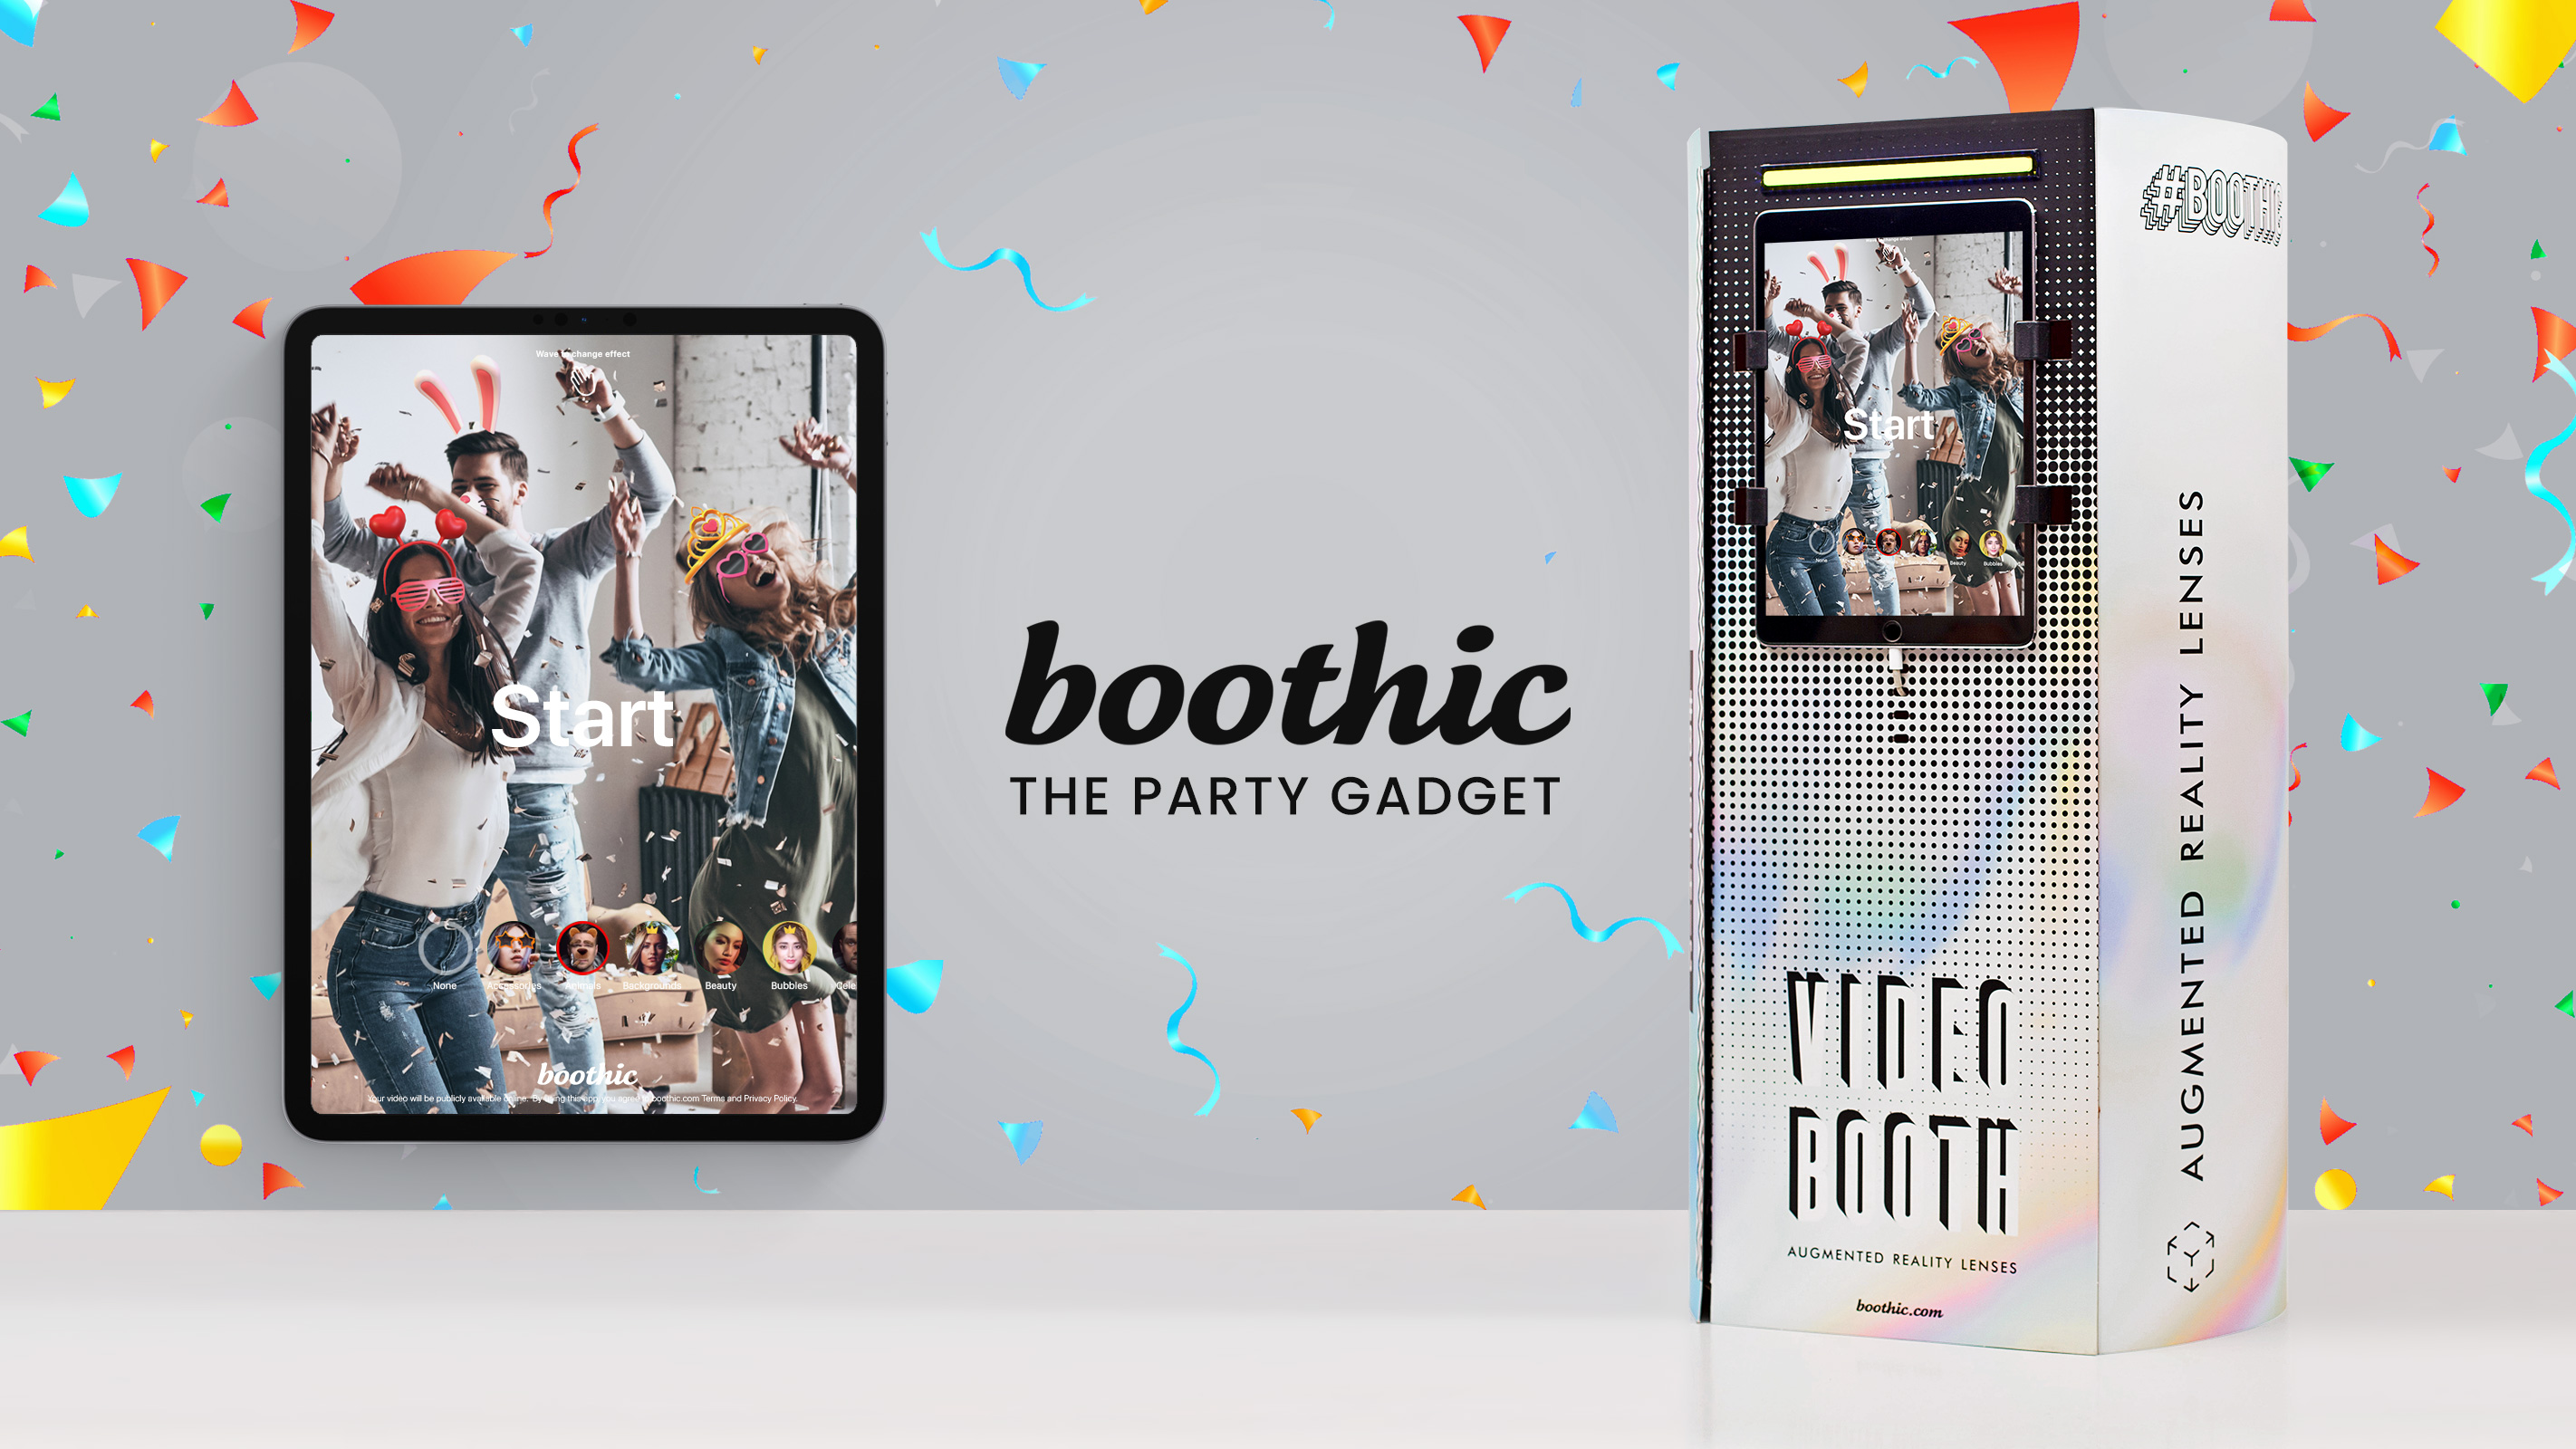 Boothic Video Booth Kit 🔥 The party gadget 🔥 Do-It-Yourself Photo Booth Kit